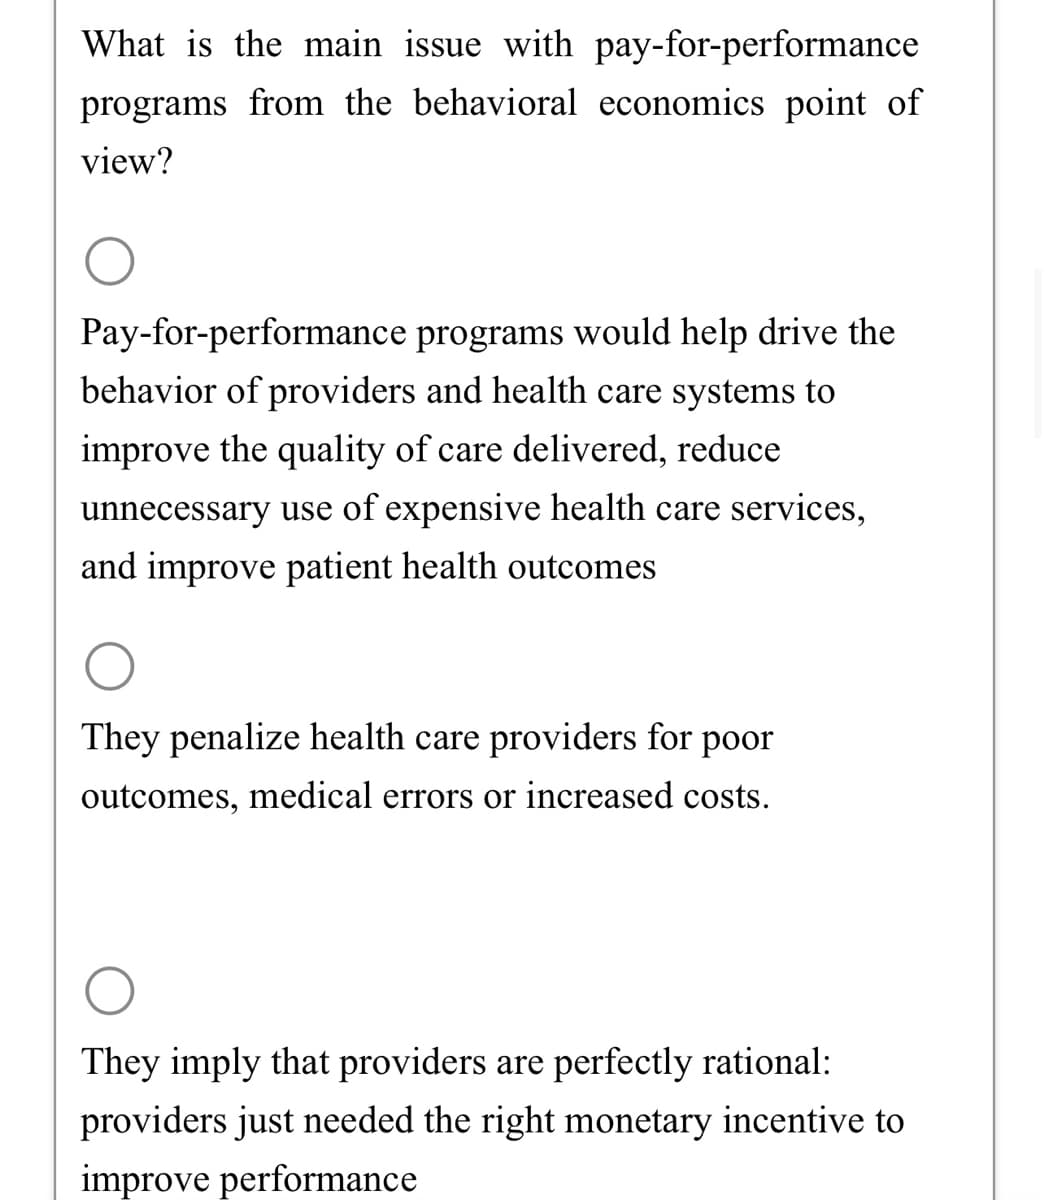 What is the main issue with pay-for-performance
programs from the behavioral economics point of
view?
Pay-for-performance programs would help drive the
behavior of providers and health care systems to
improve the quality of care delivered, reduce
unnecessary use of expensive health care services,
and improve patient health outcomes
They penalize health care providers for poor
outcomes, medical errors or increased costs.
They imply that providers are perfectly rational:
providers just needed the right monetary incentive to
improve performance